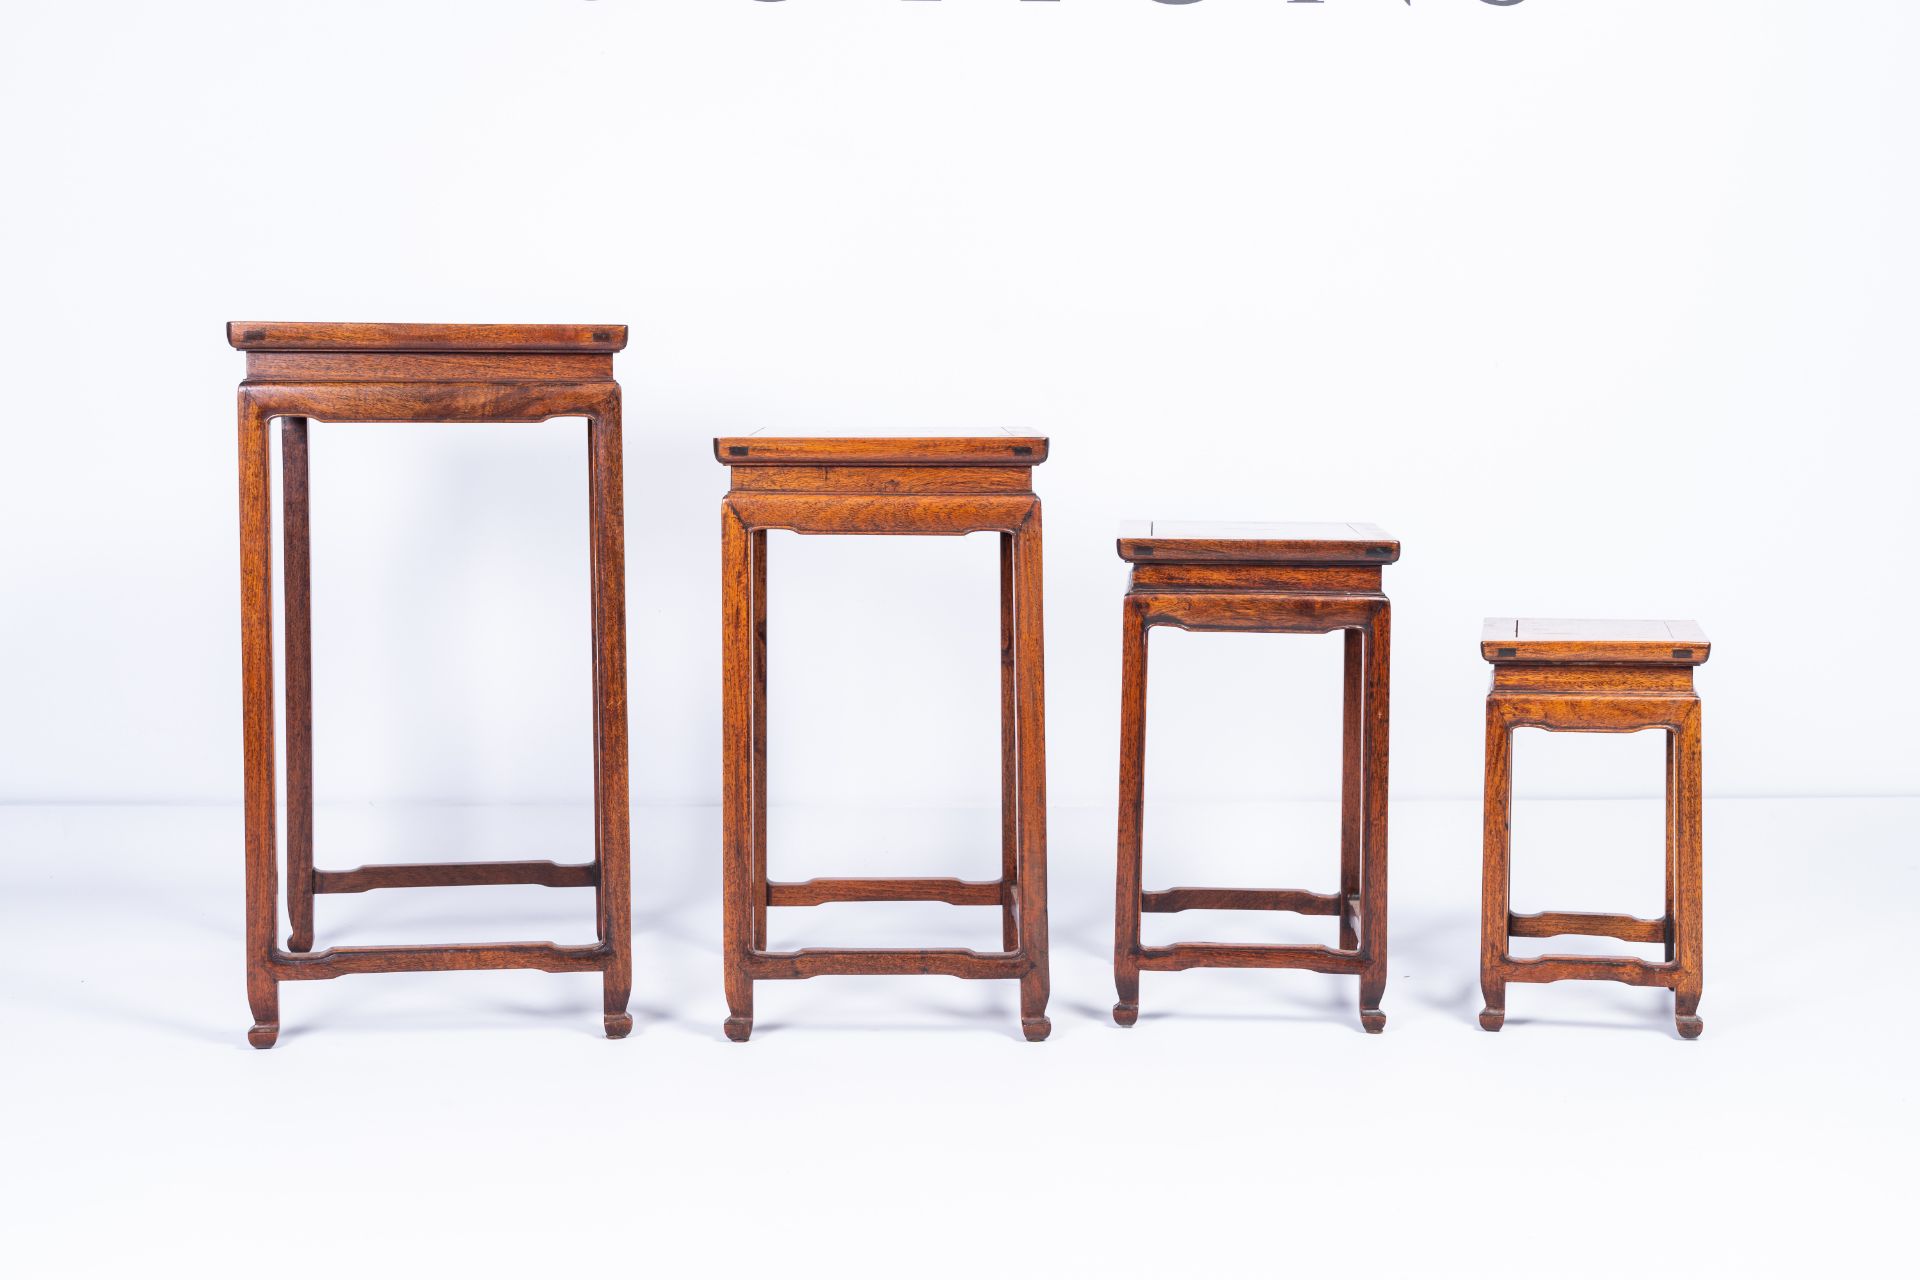 Four Chinese rectangular wood gigogne side tables, 20th C. - Image 4 of 8